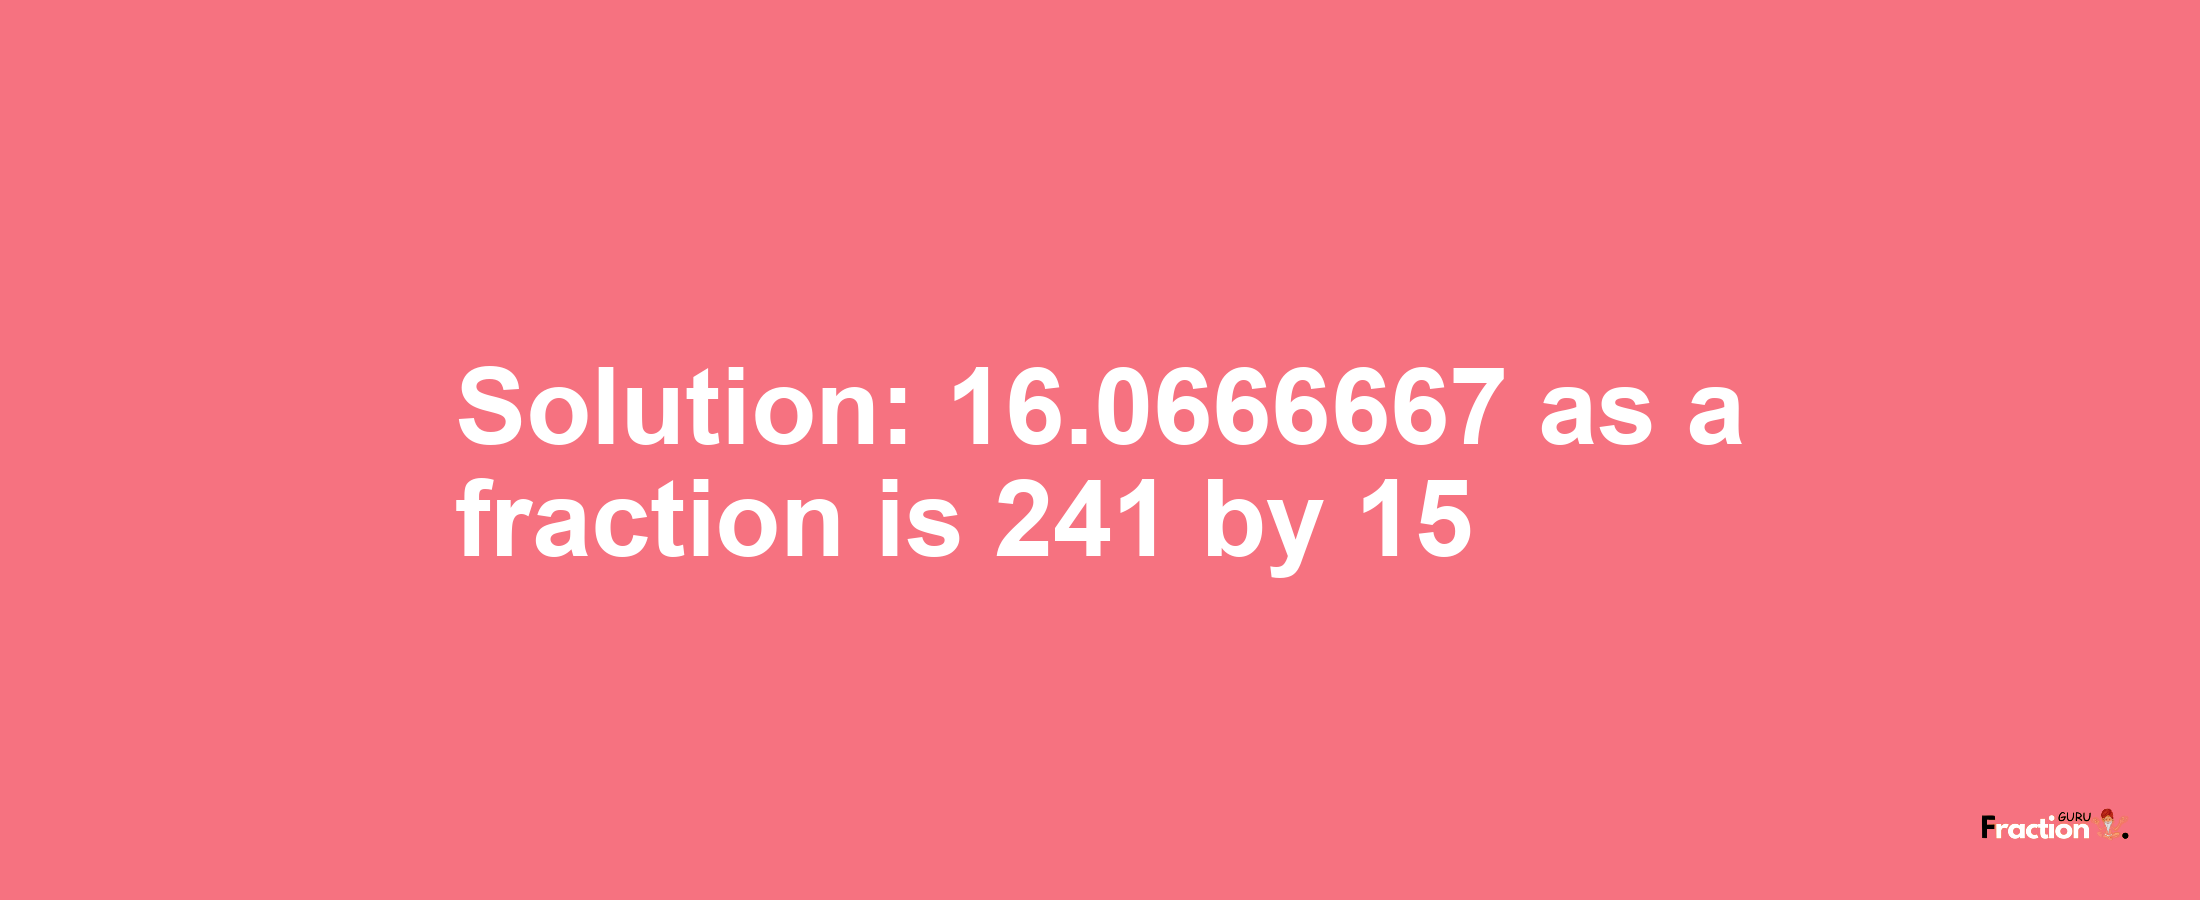 Solution:16.0666667 as a fraction is 241/15